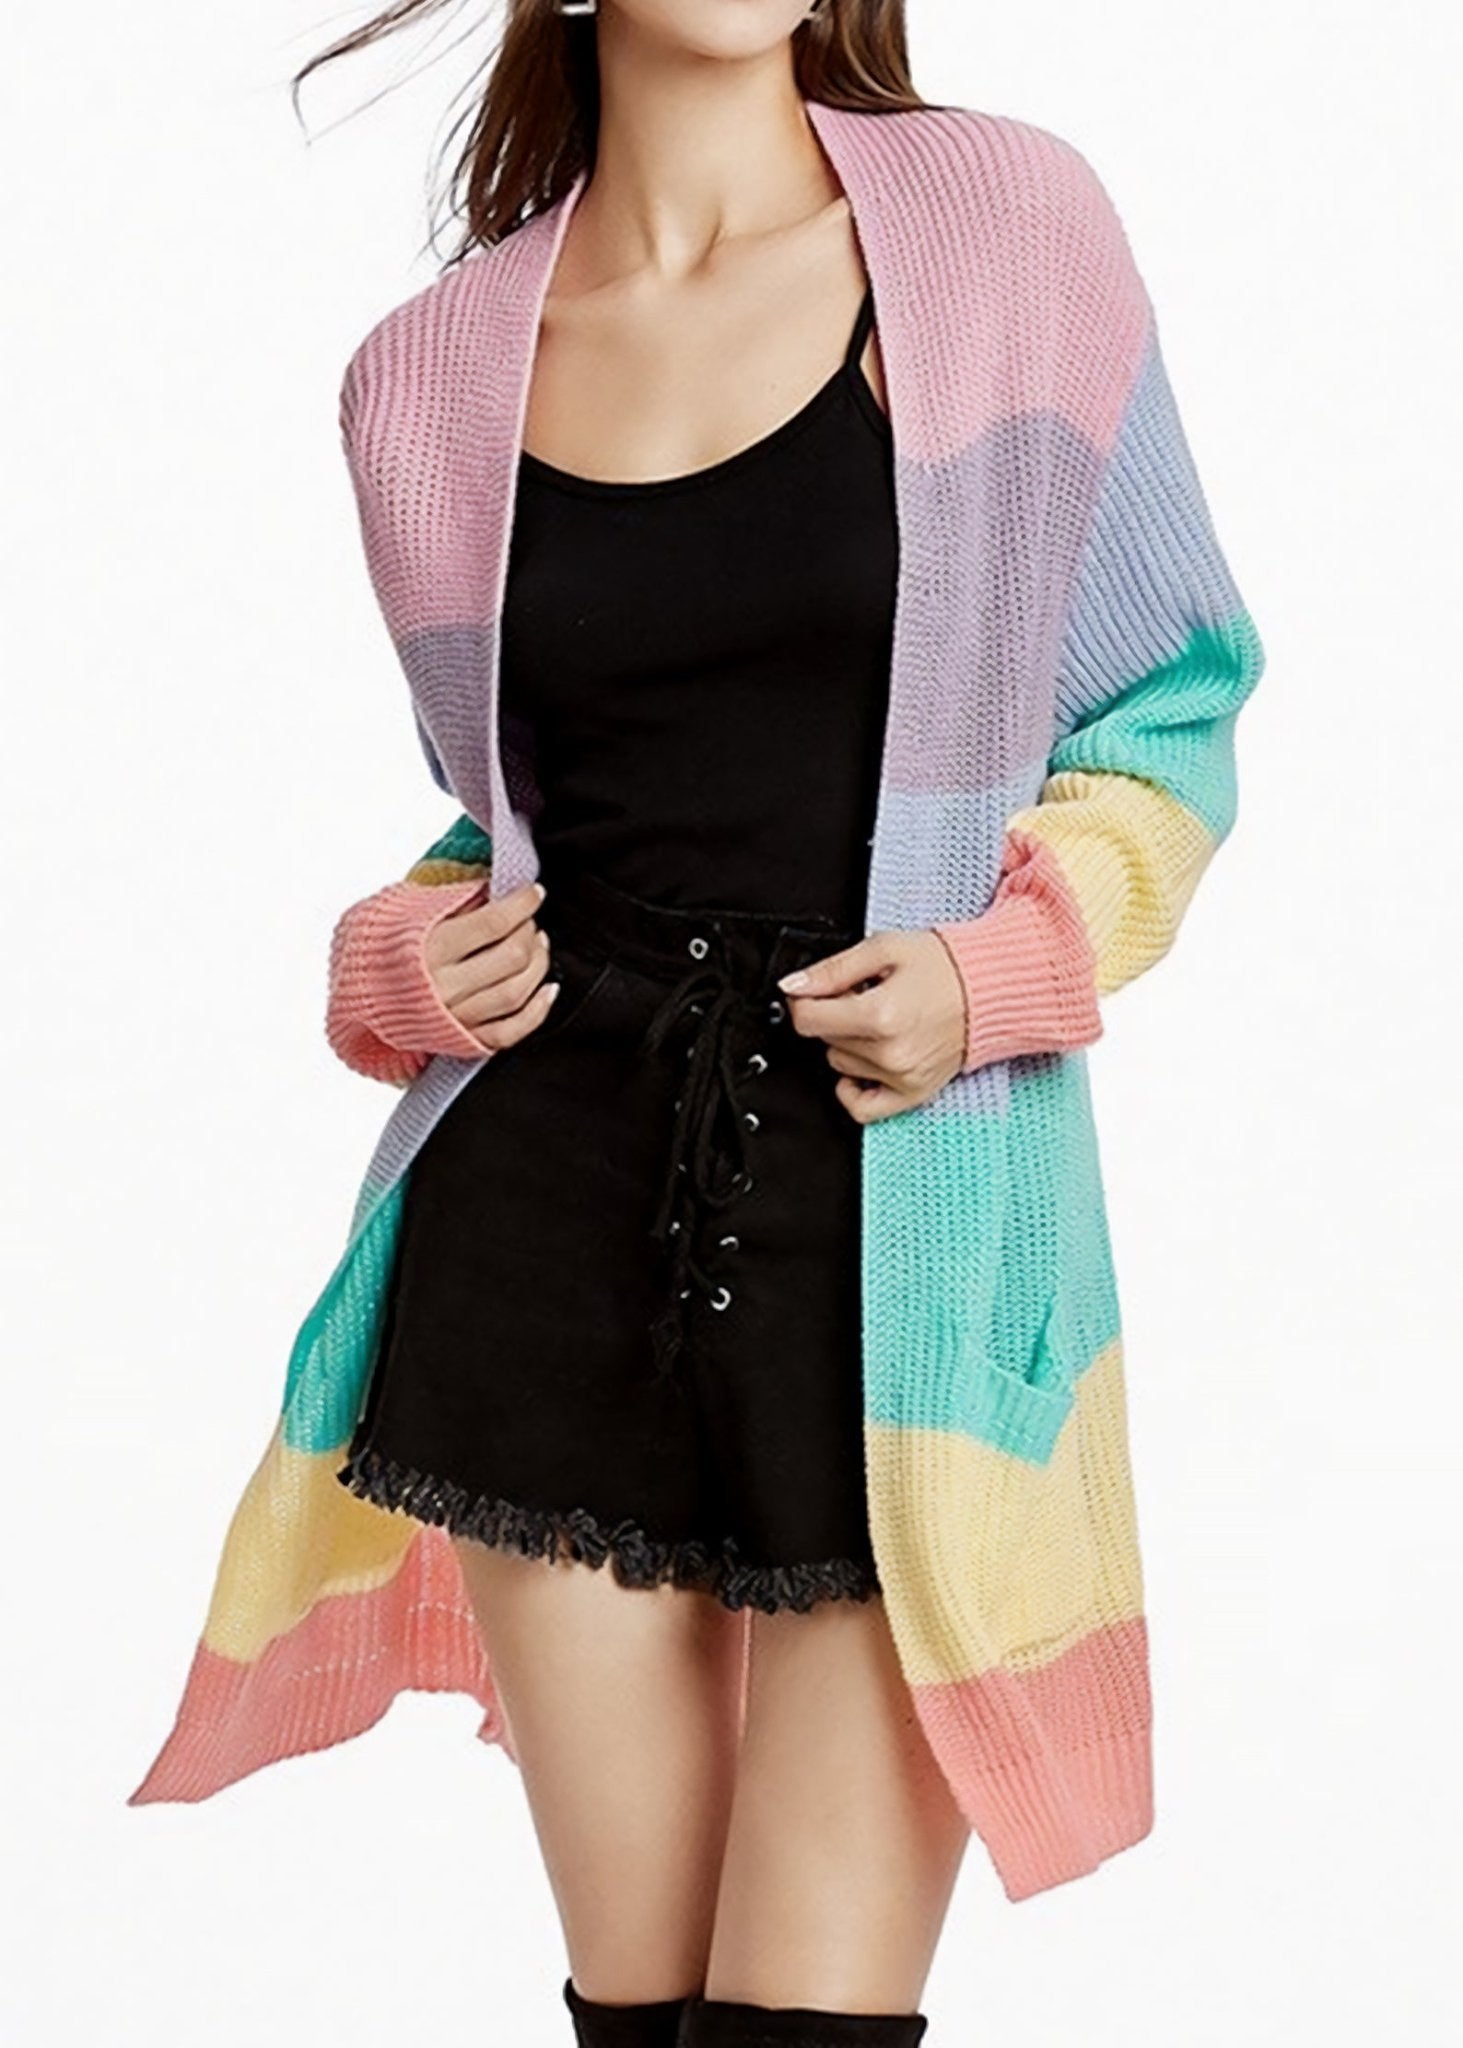 Rainbow striped long cardigan Sweater - In Control Clothing